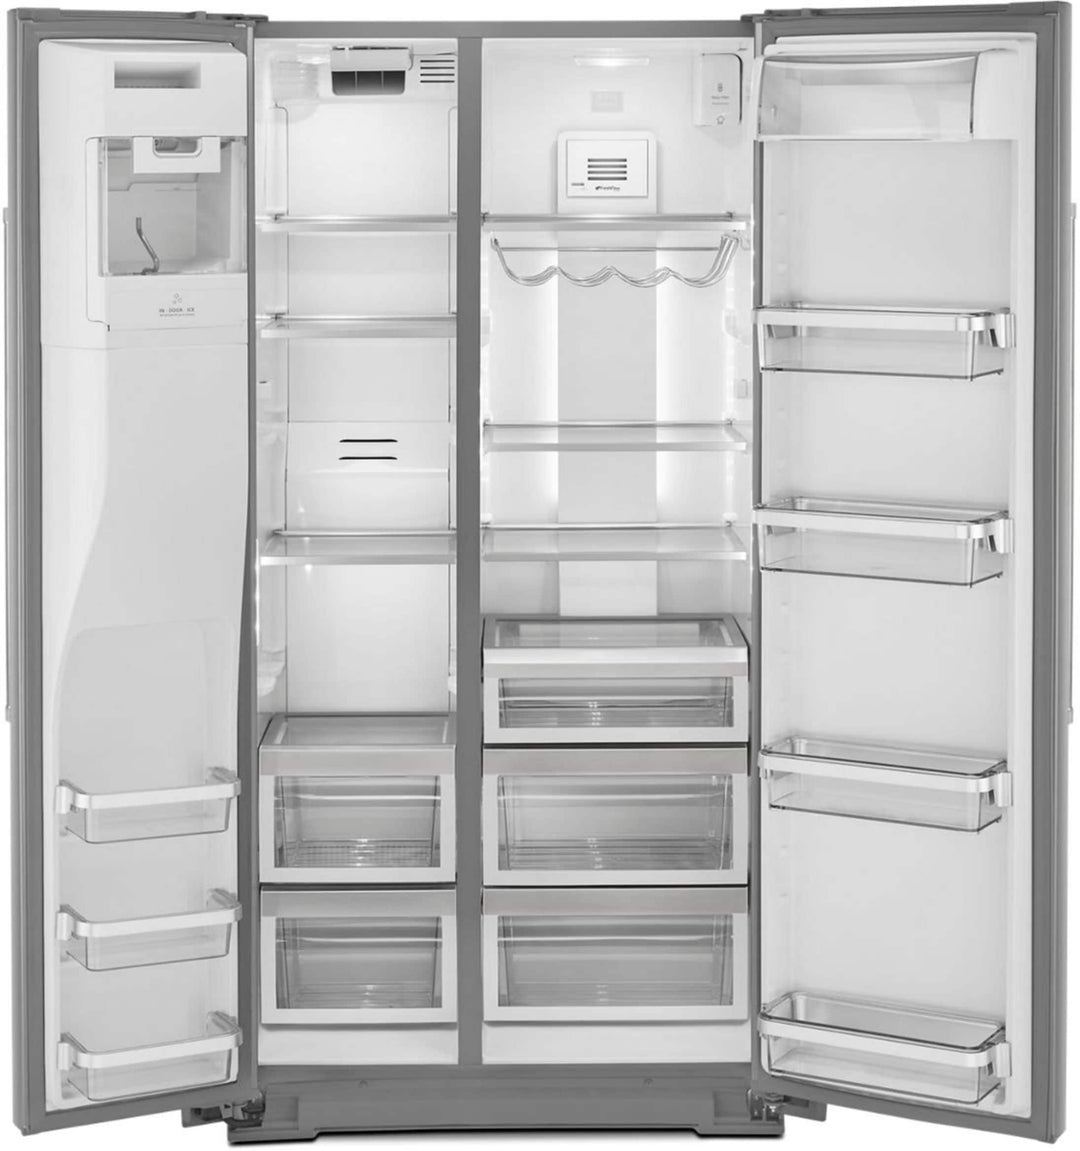 KitchenAid - 22.6 Cu. Ft. Side-by-Side Counter-Depth Refrigerator - Stainless steel_8